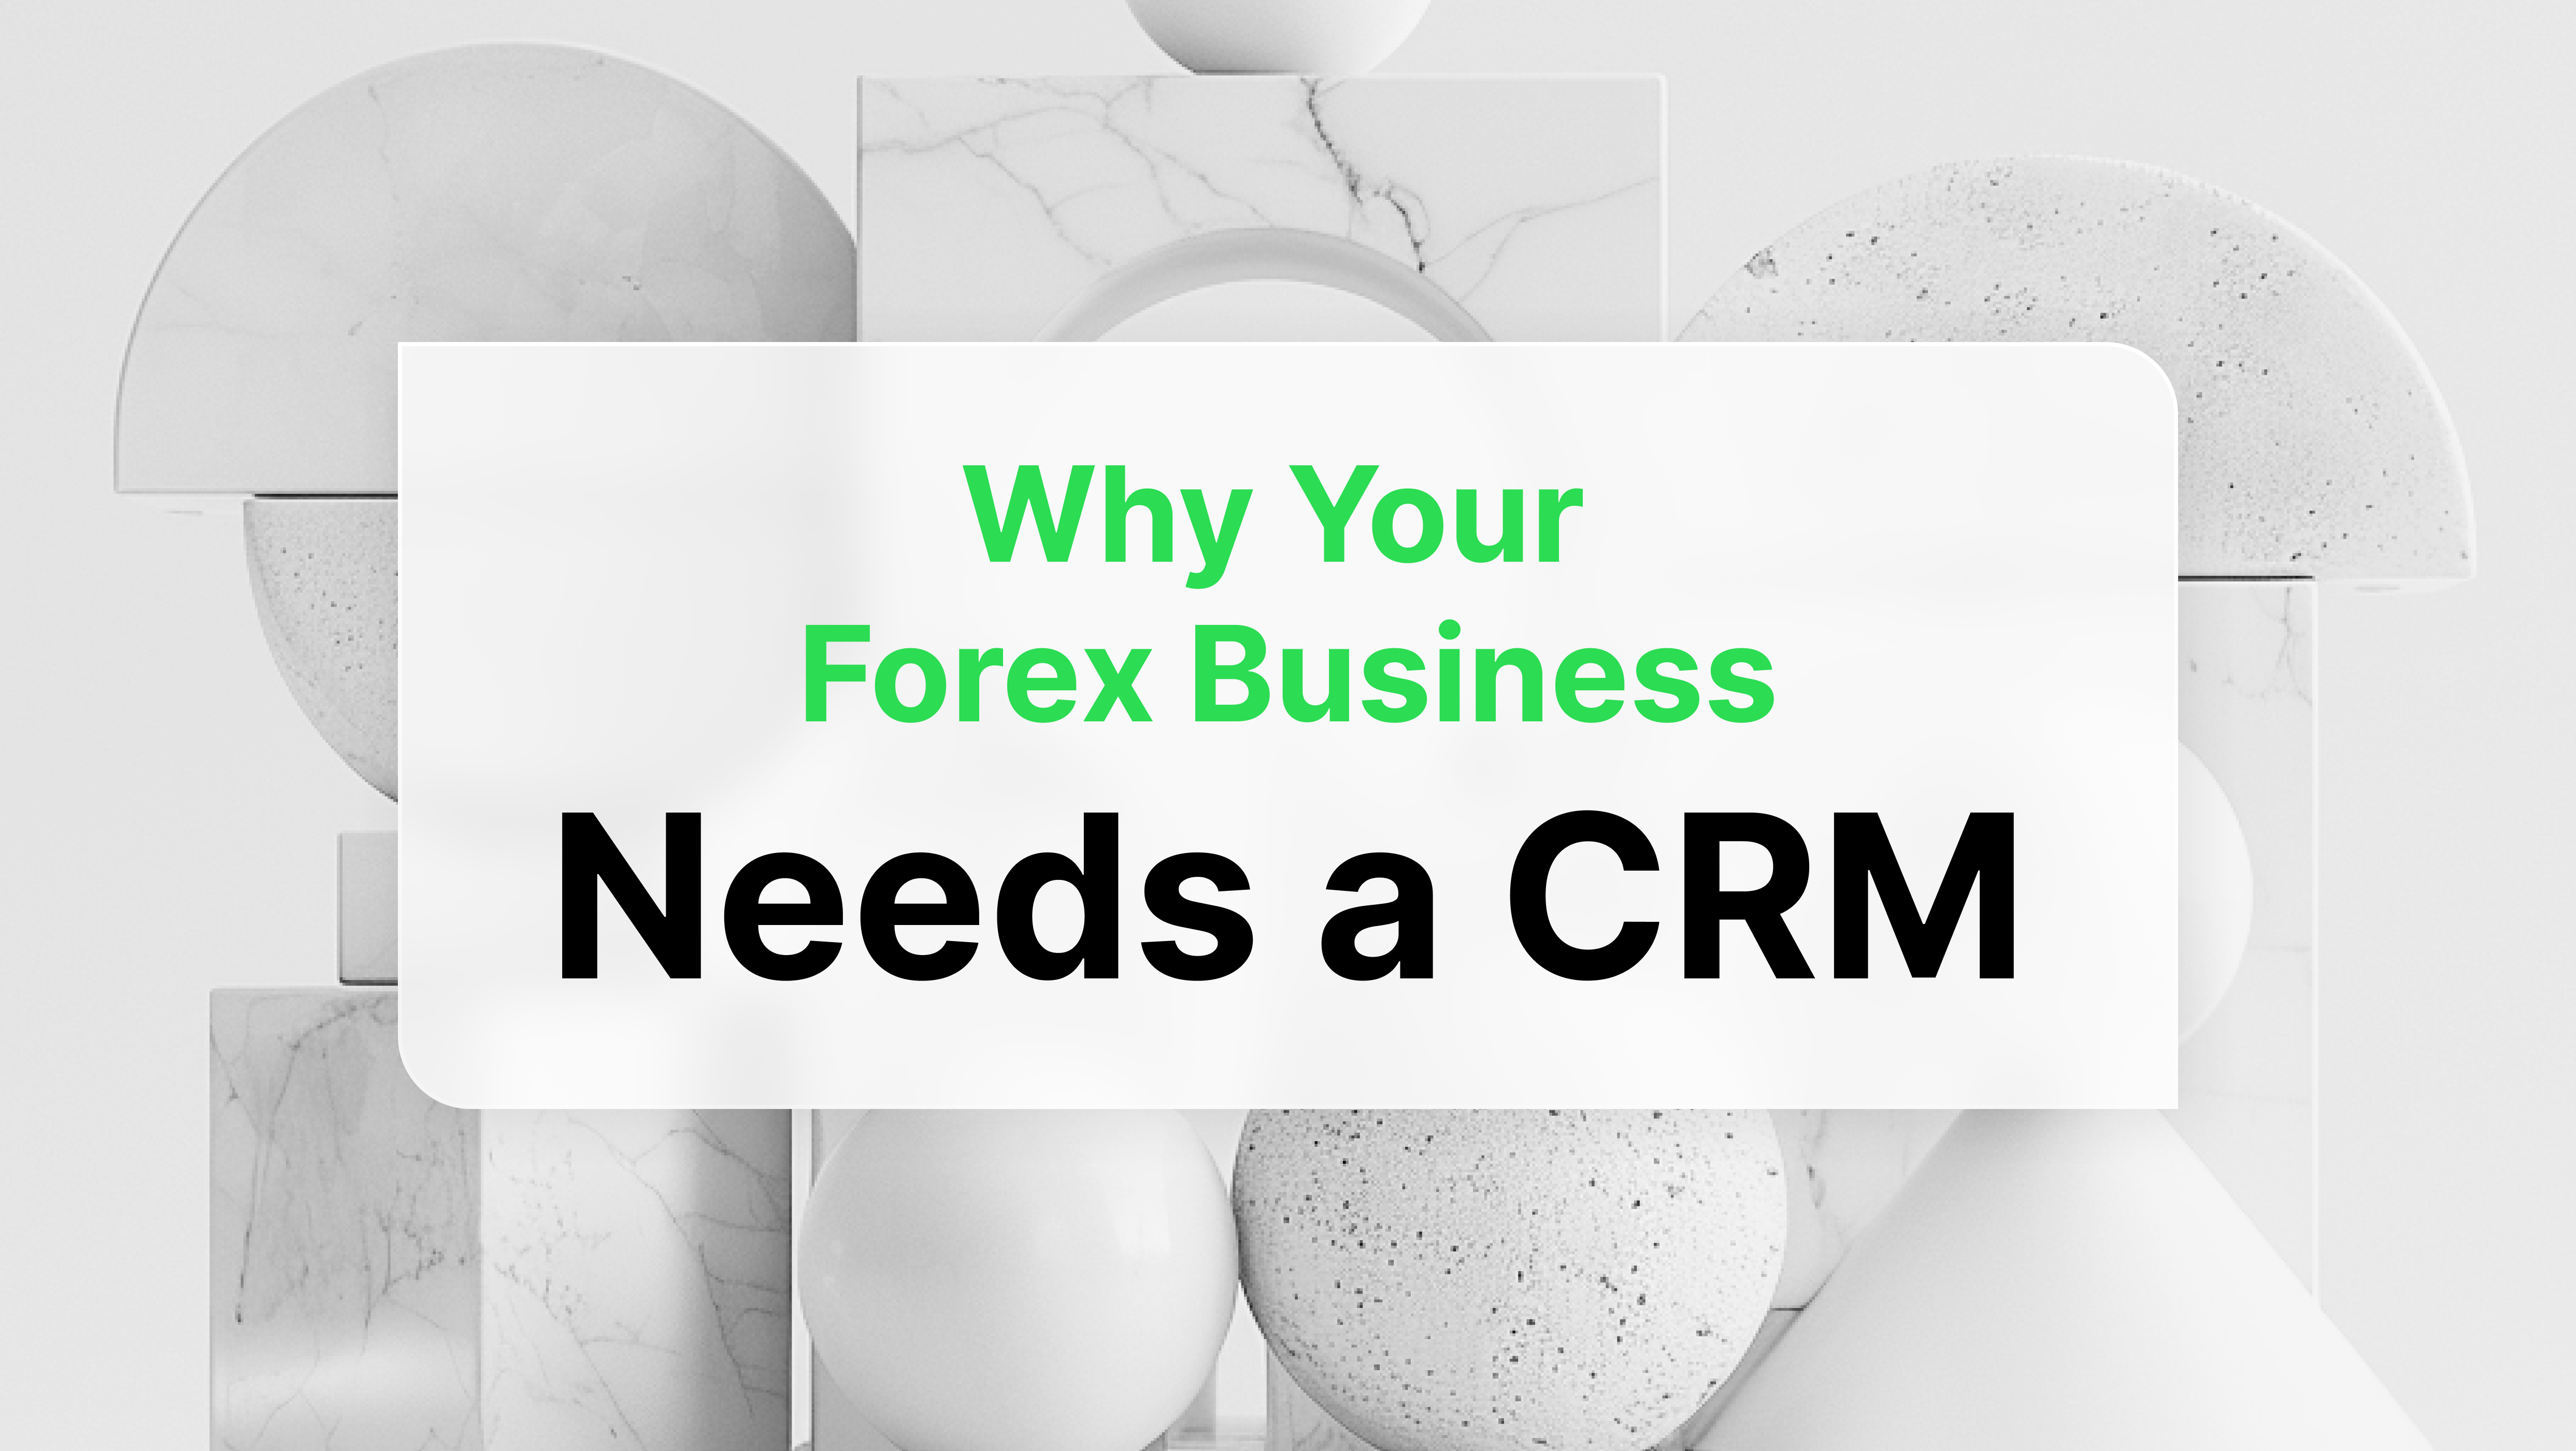 Better Client Managing: Why Your Forex Business Needs a CRM